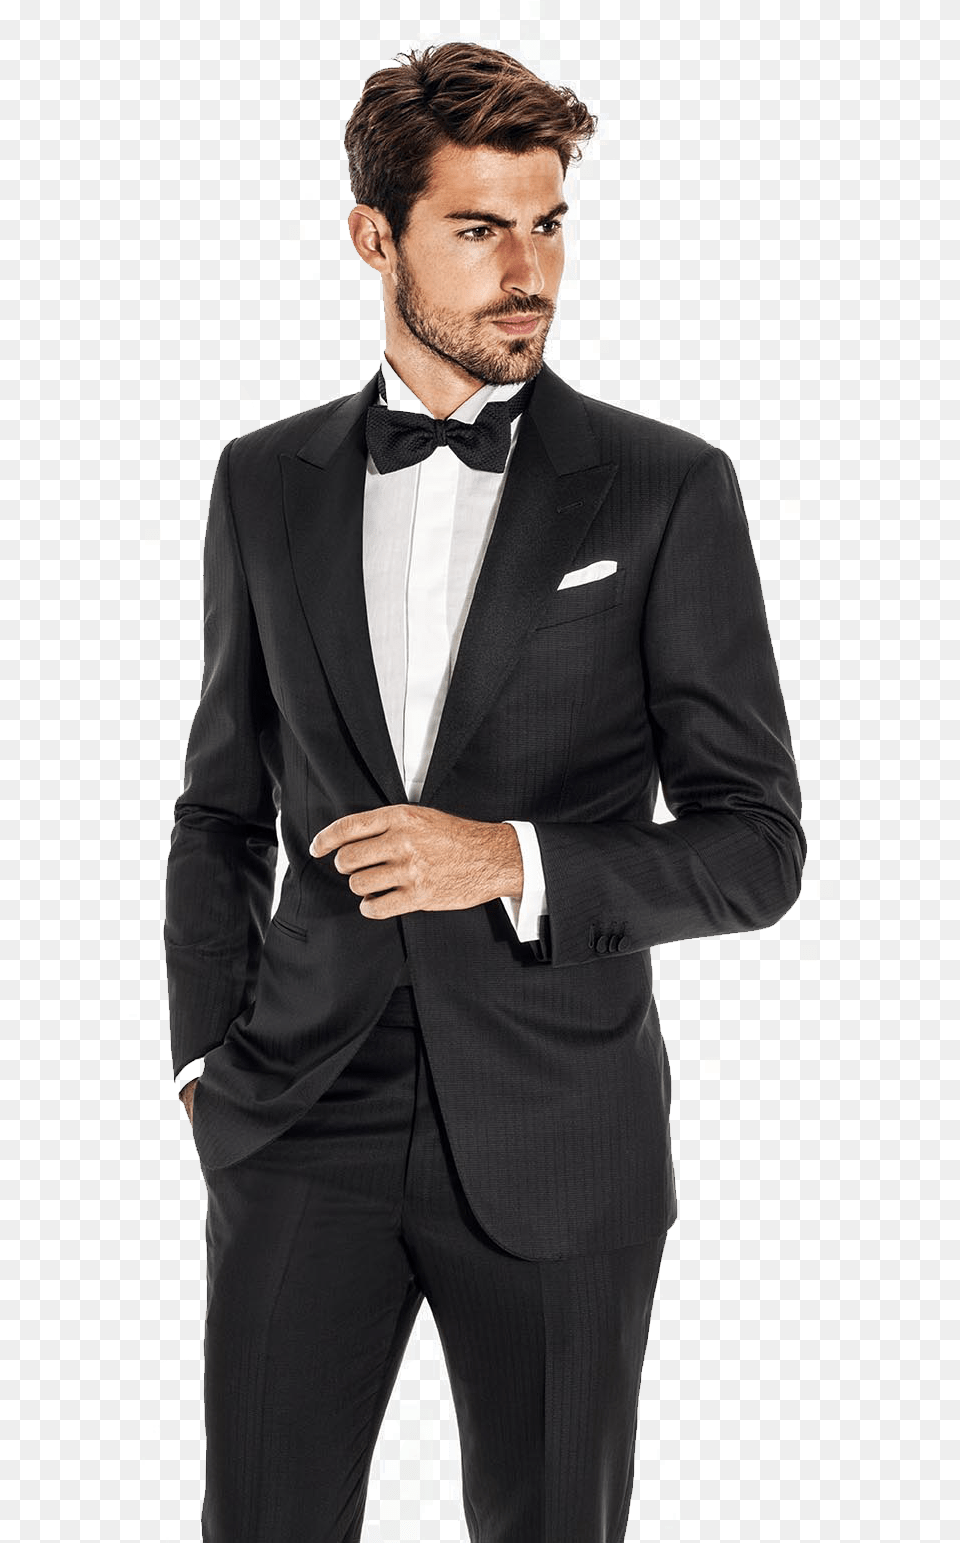 Tuxedo Images Transparent Man In Suit, Clothing, Formal Wear, Adult, Male Png Image